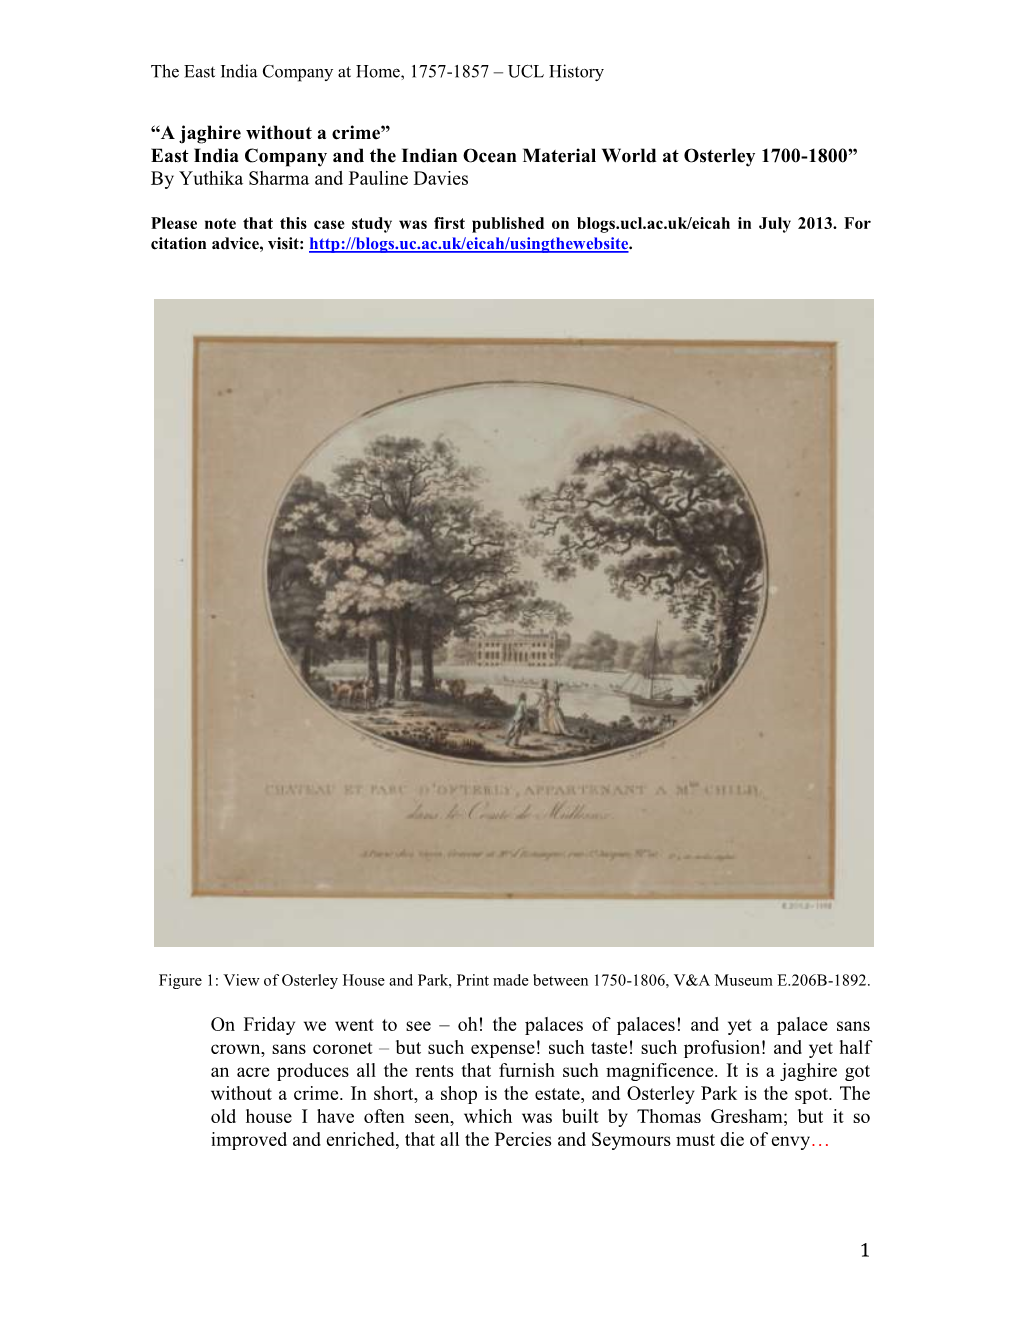 East India Company and the Indian Ocean Material World at Osterley 1700-1800” by Yuthika Sharma and Pauline Davies